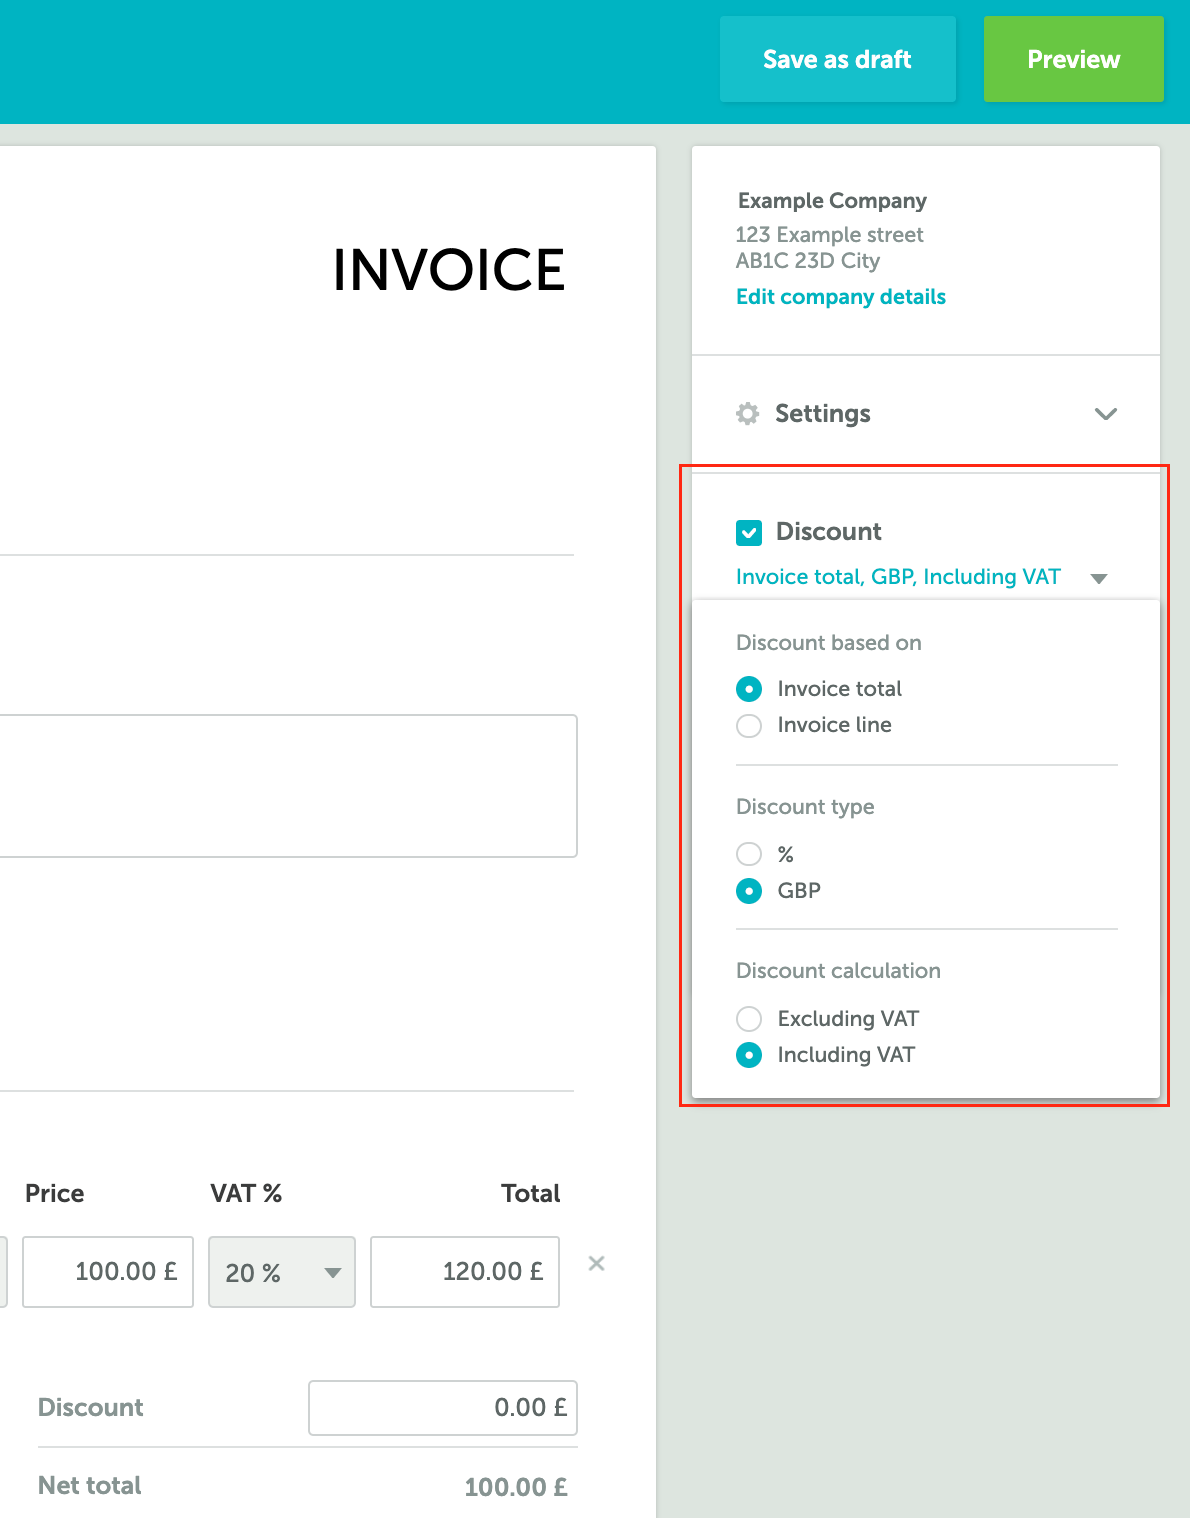 Setting up discounts on invoices with Zervant